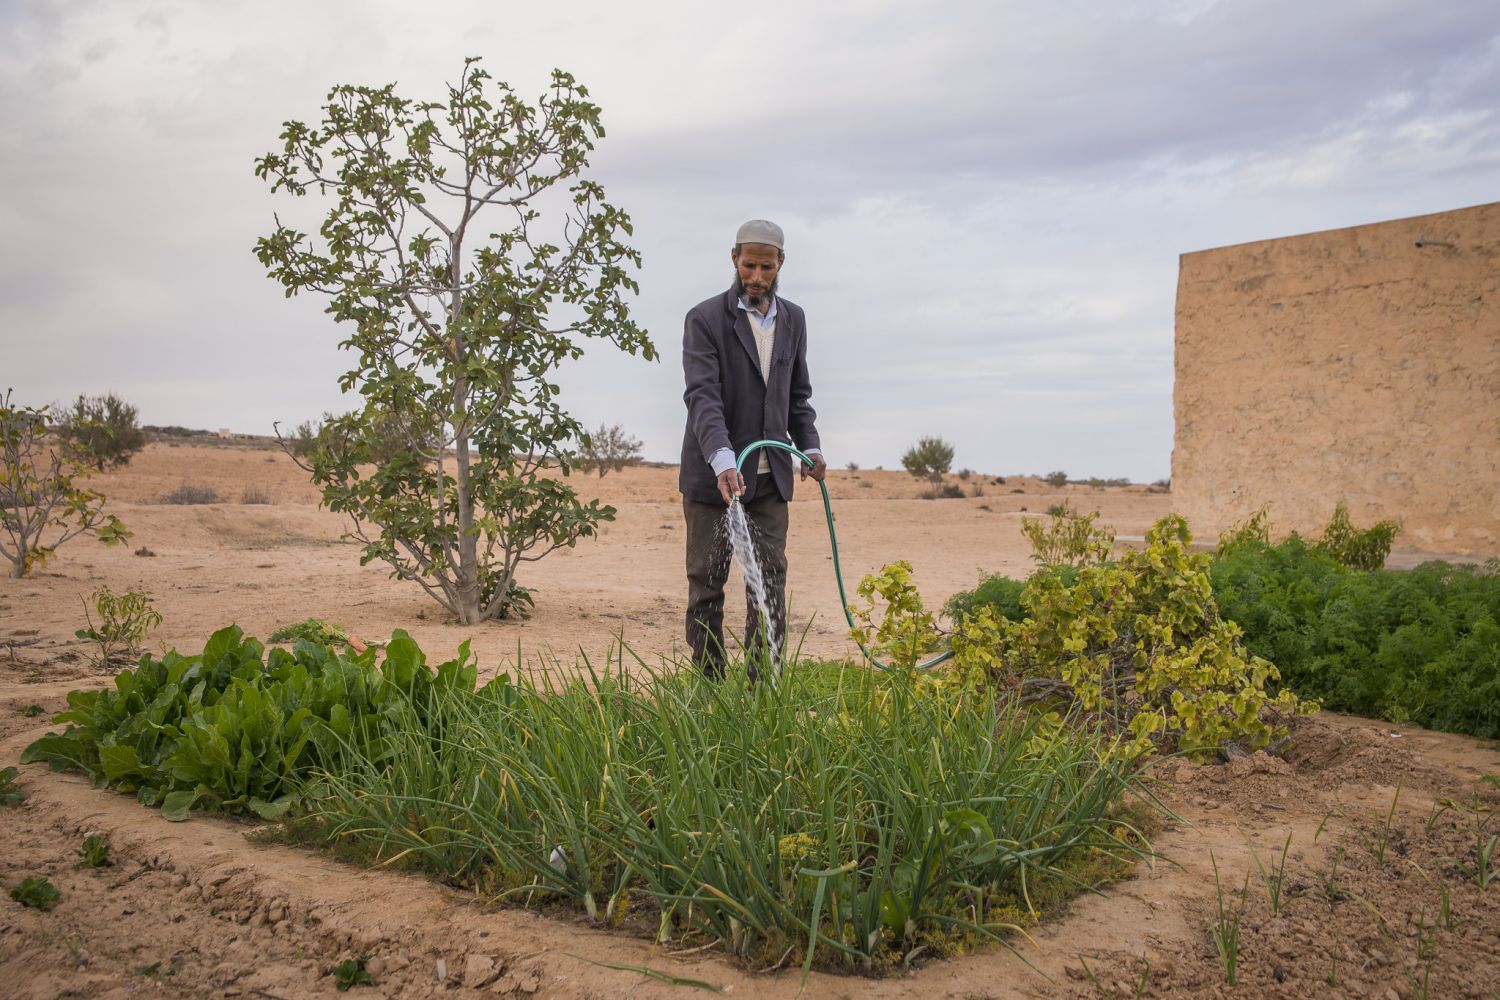 How Tunisia's agricultural policy is driving farmers to despair